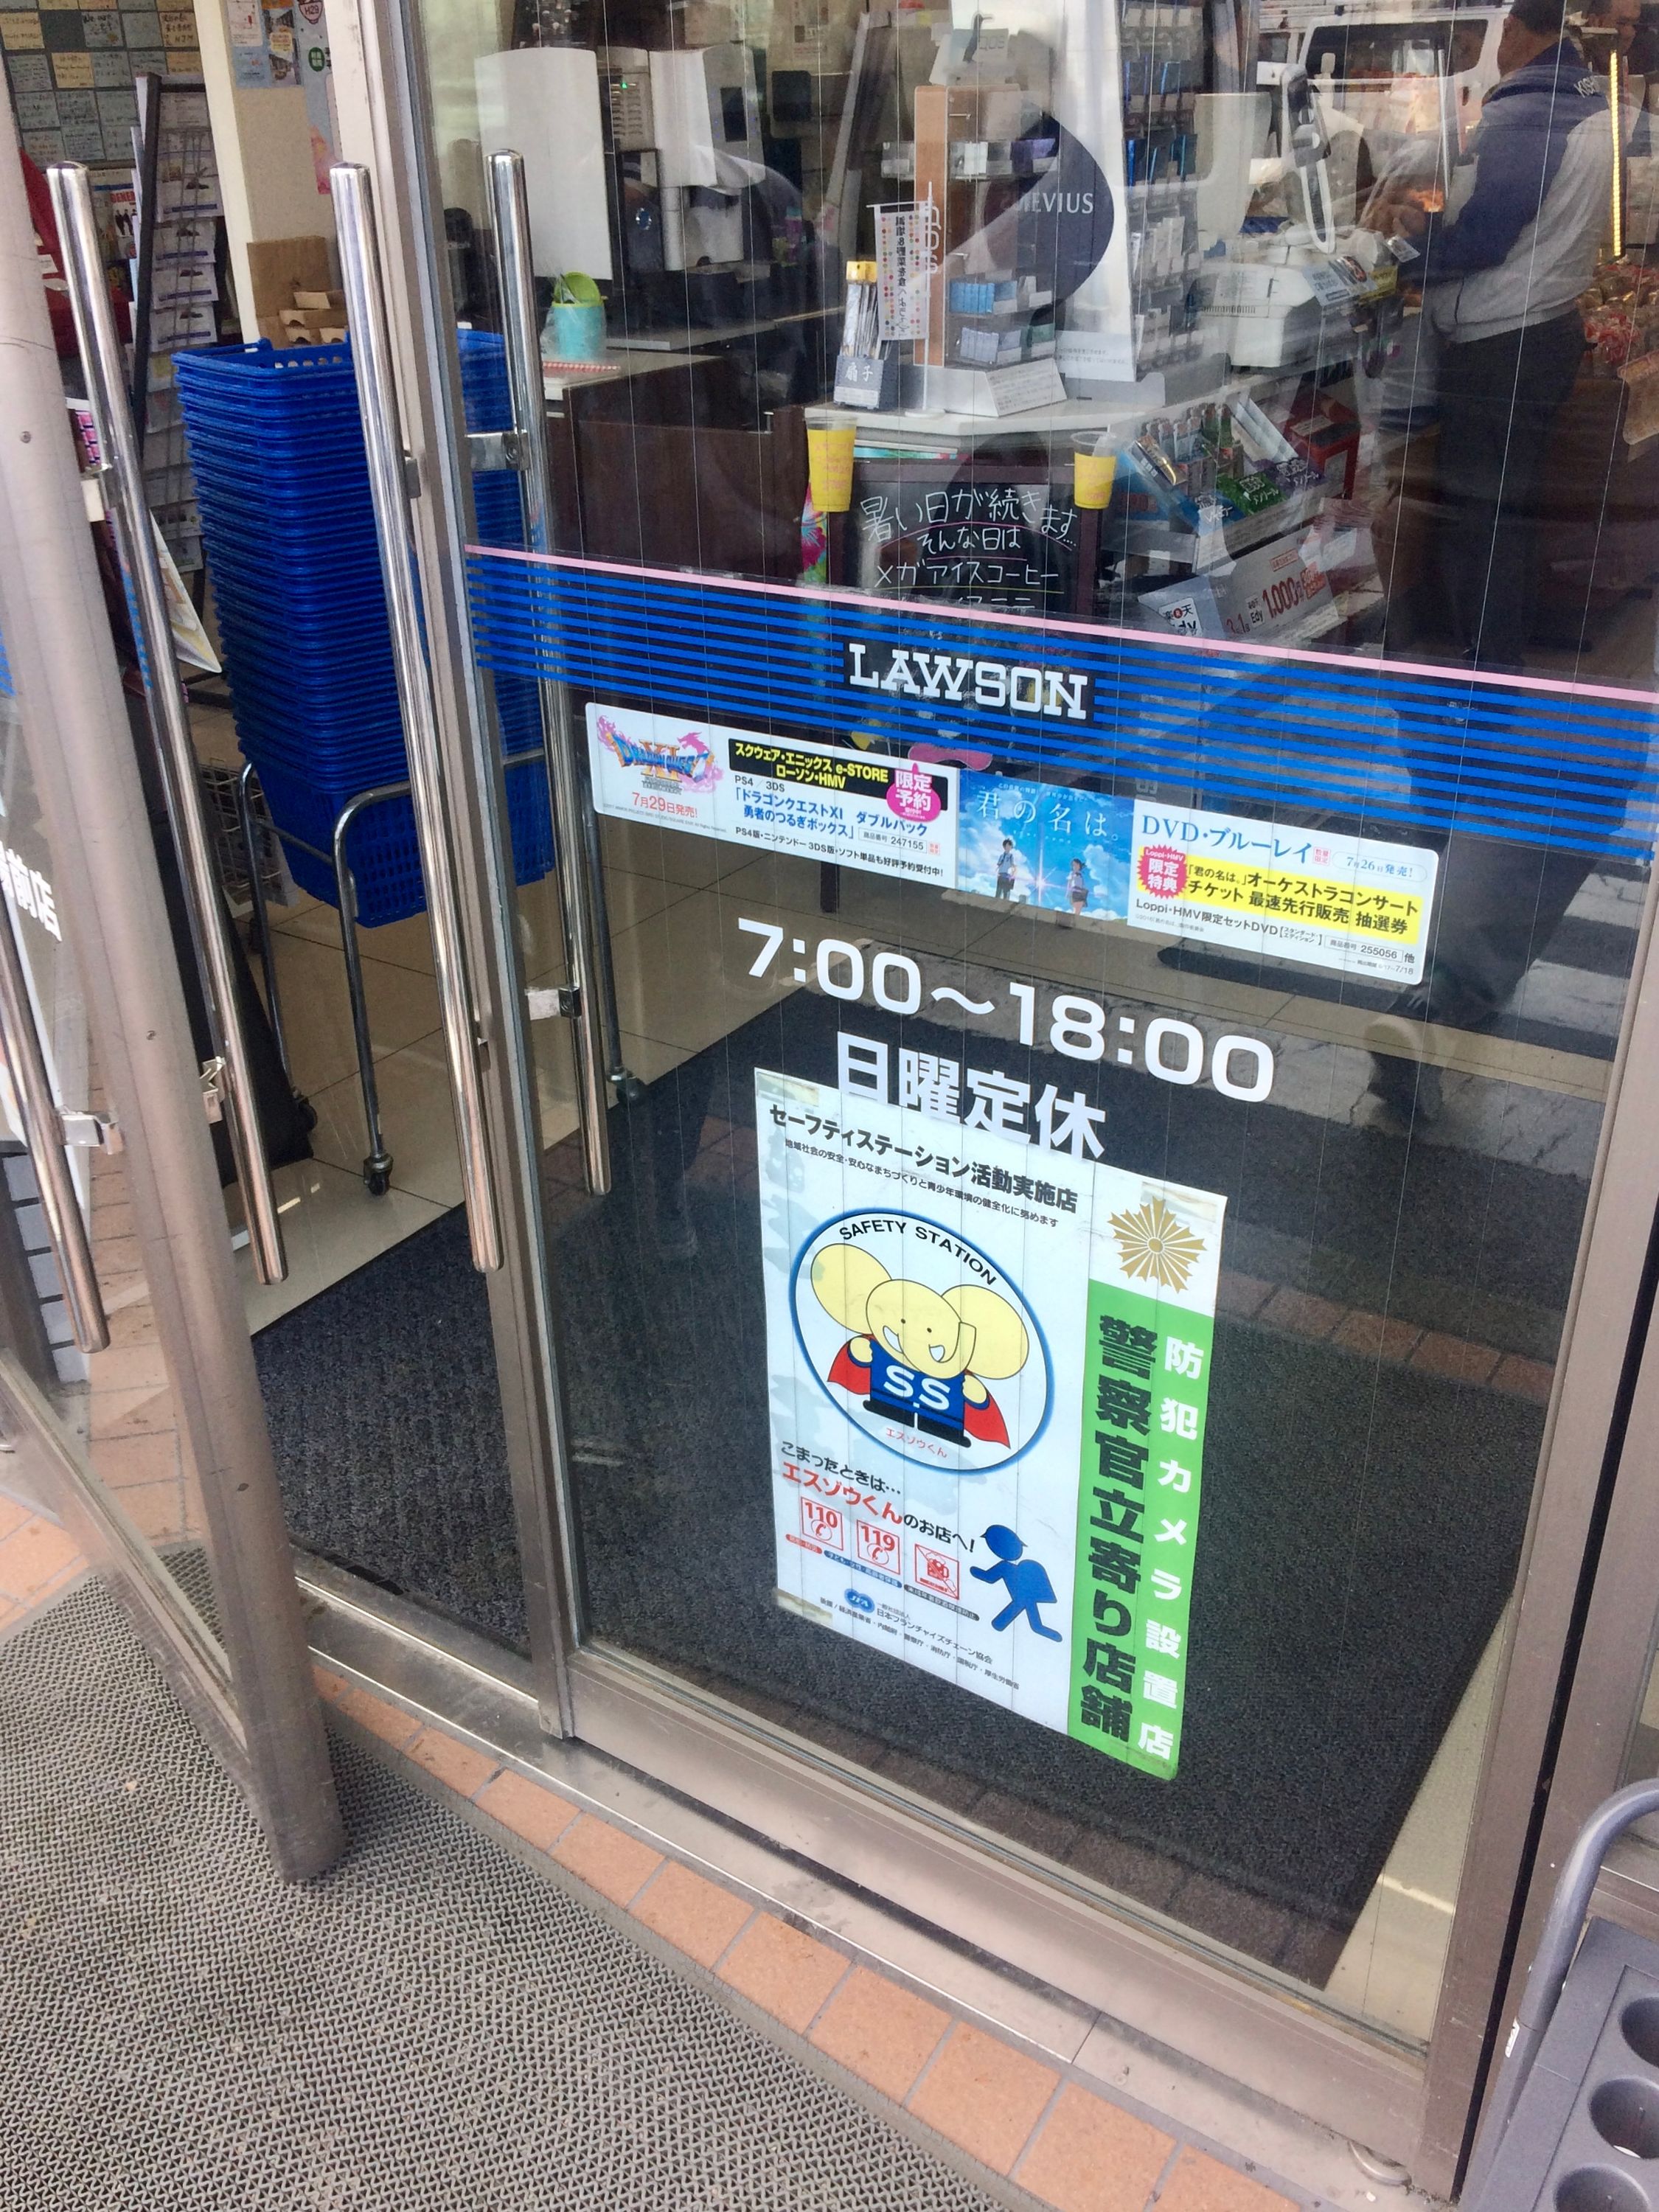 Sign on the door of a Lawson convenience store shows a closing time of 6 PM (these stores are usually open 24/7).